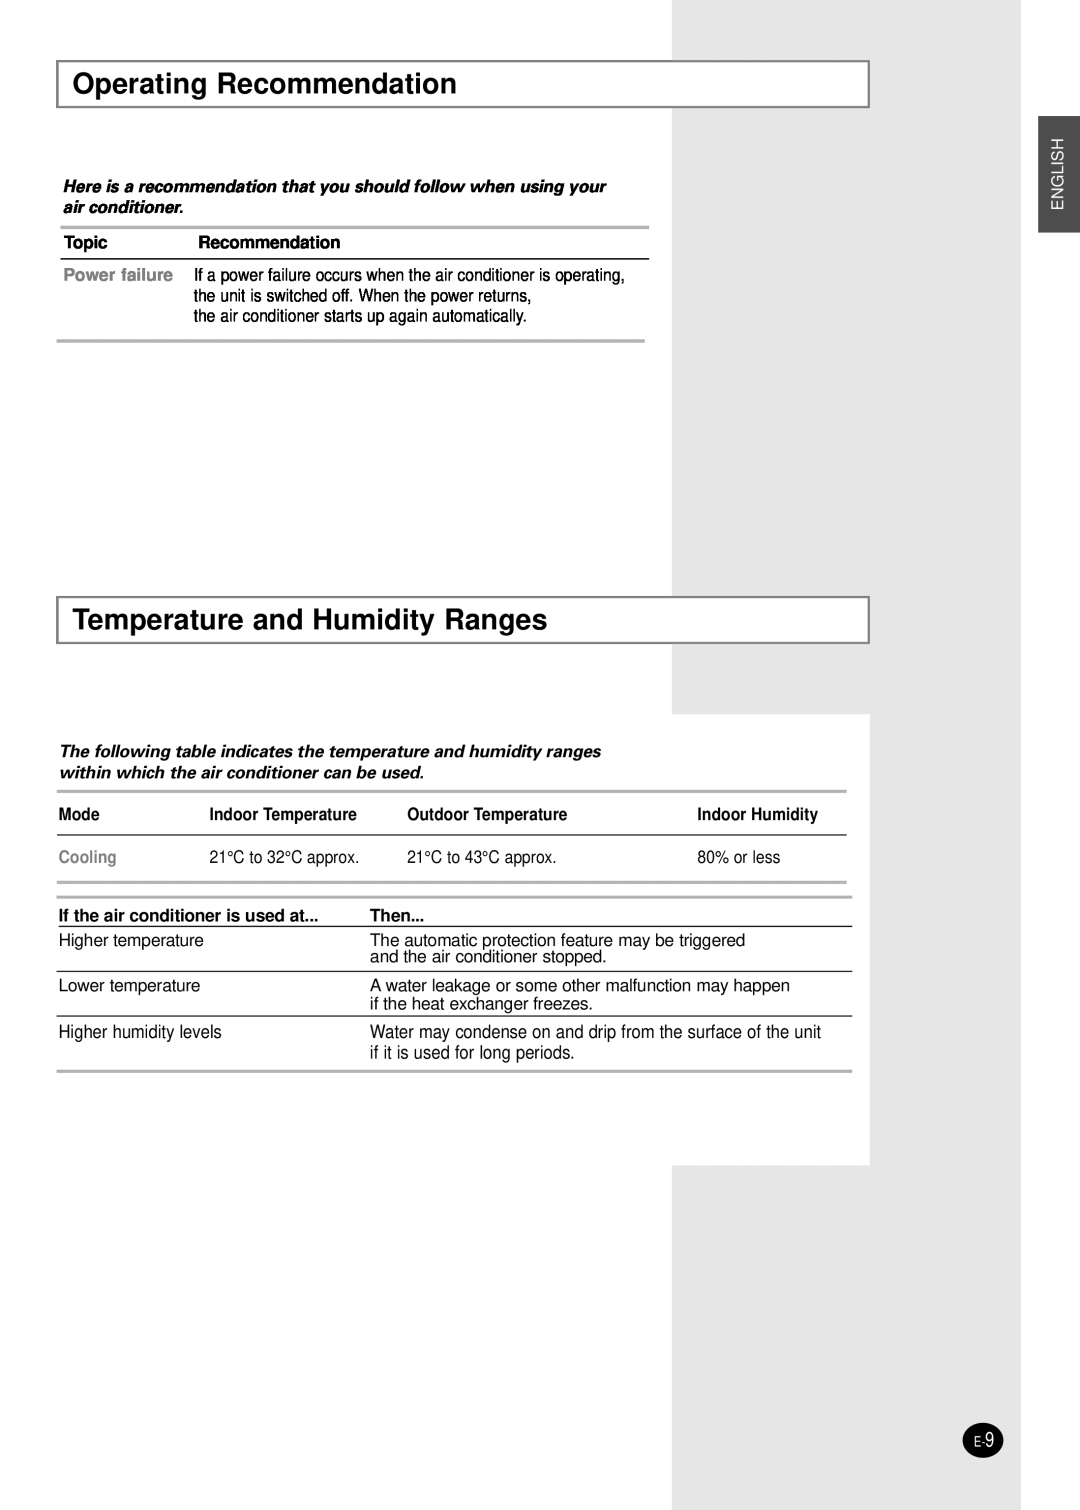 Samsung AW07F2NBD Operating Recommendation, Temperature and Humidity Ranges, Higher humidity levels, Cooling, English 